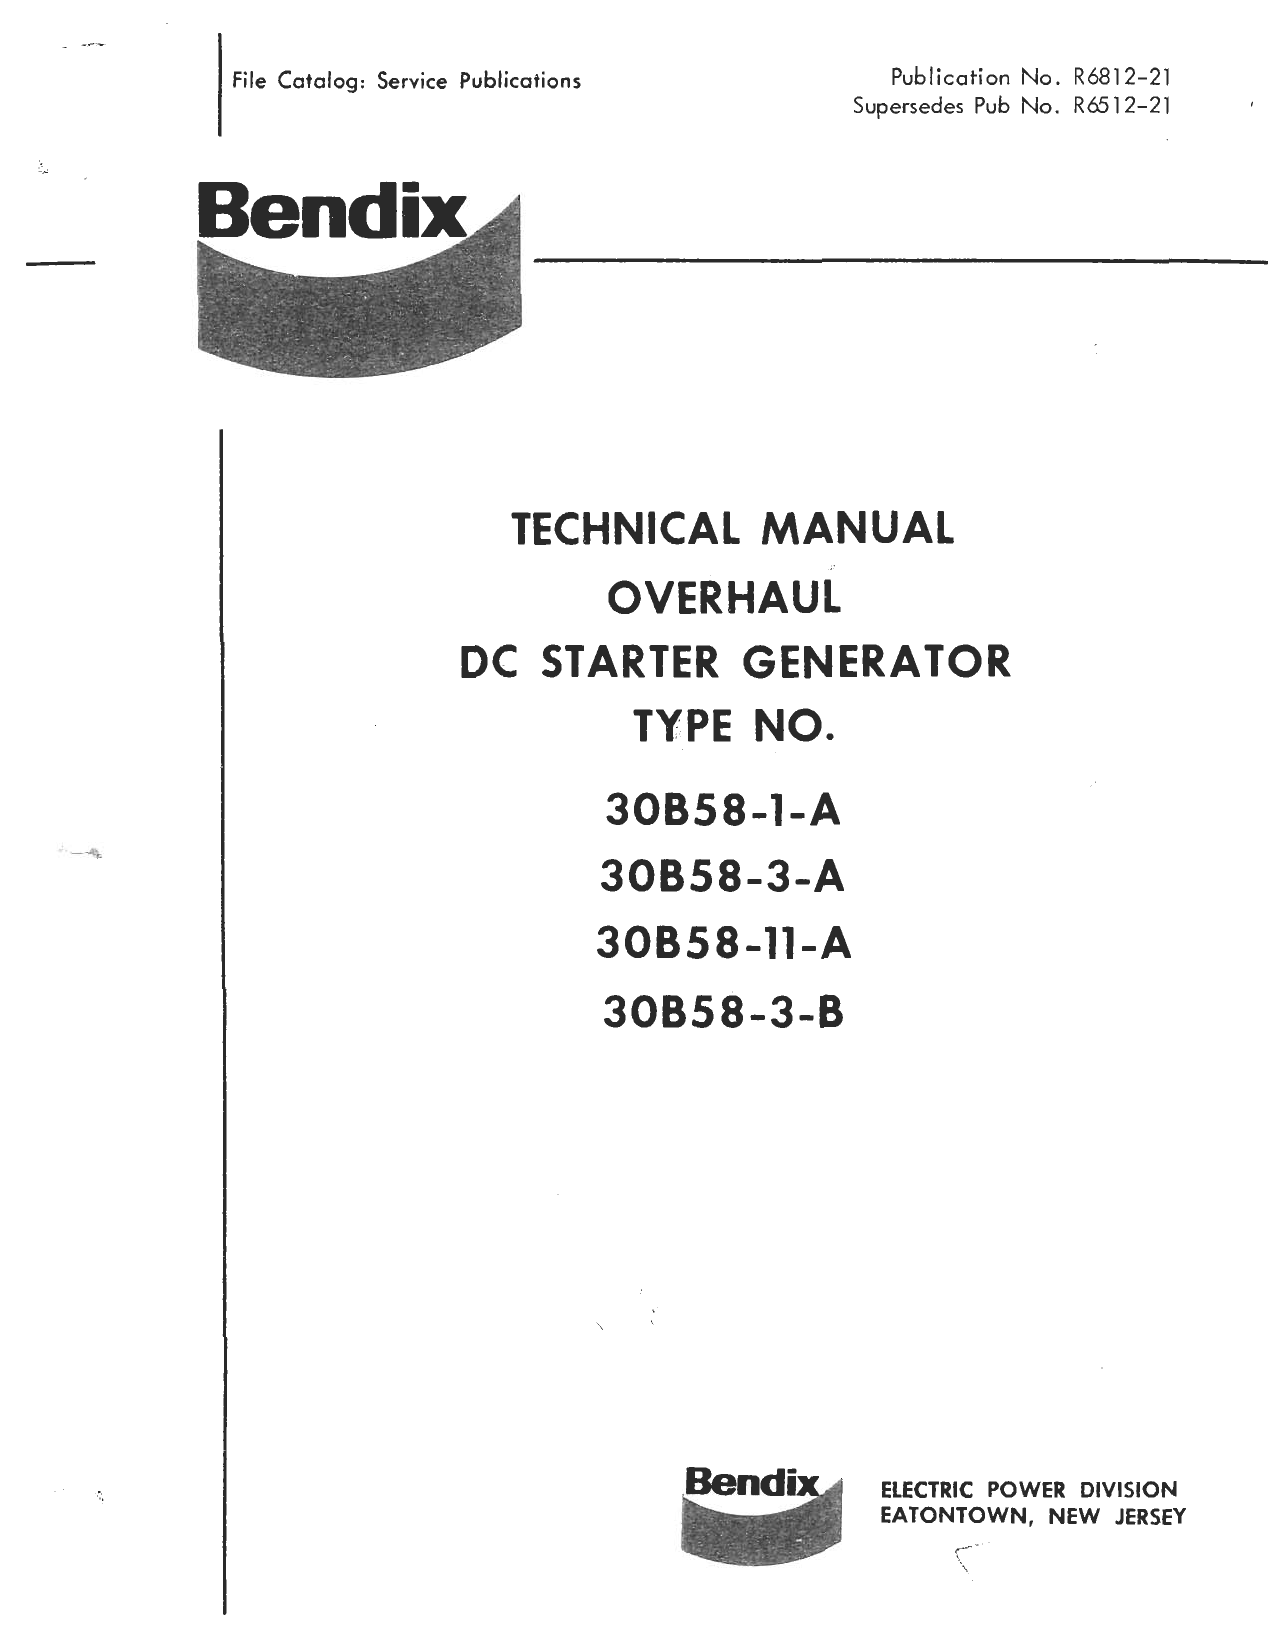 Sample page 1 from AirCorps Library document: Overhaul for DC Starter Generator - Type 30B58-1-A, 30B58-3-A, 30B58-11-A, and 30B58-3-B 